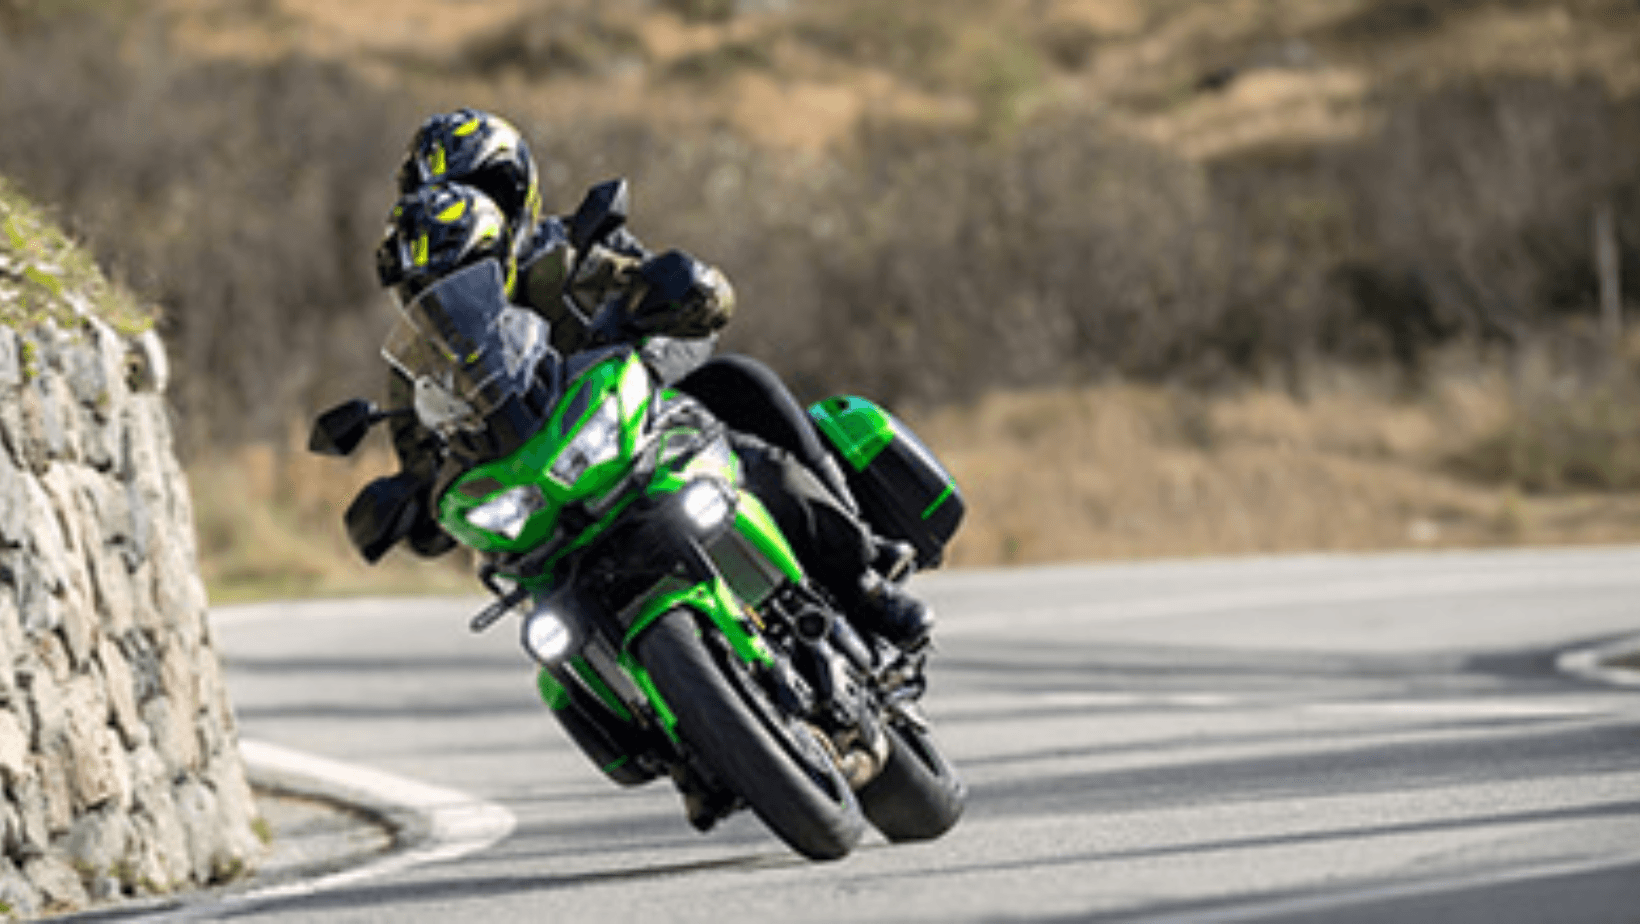 Kawasaki Unveils Discounts Up to Rs. 60,000 on Selected Models till March 31st news